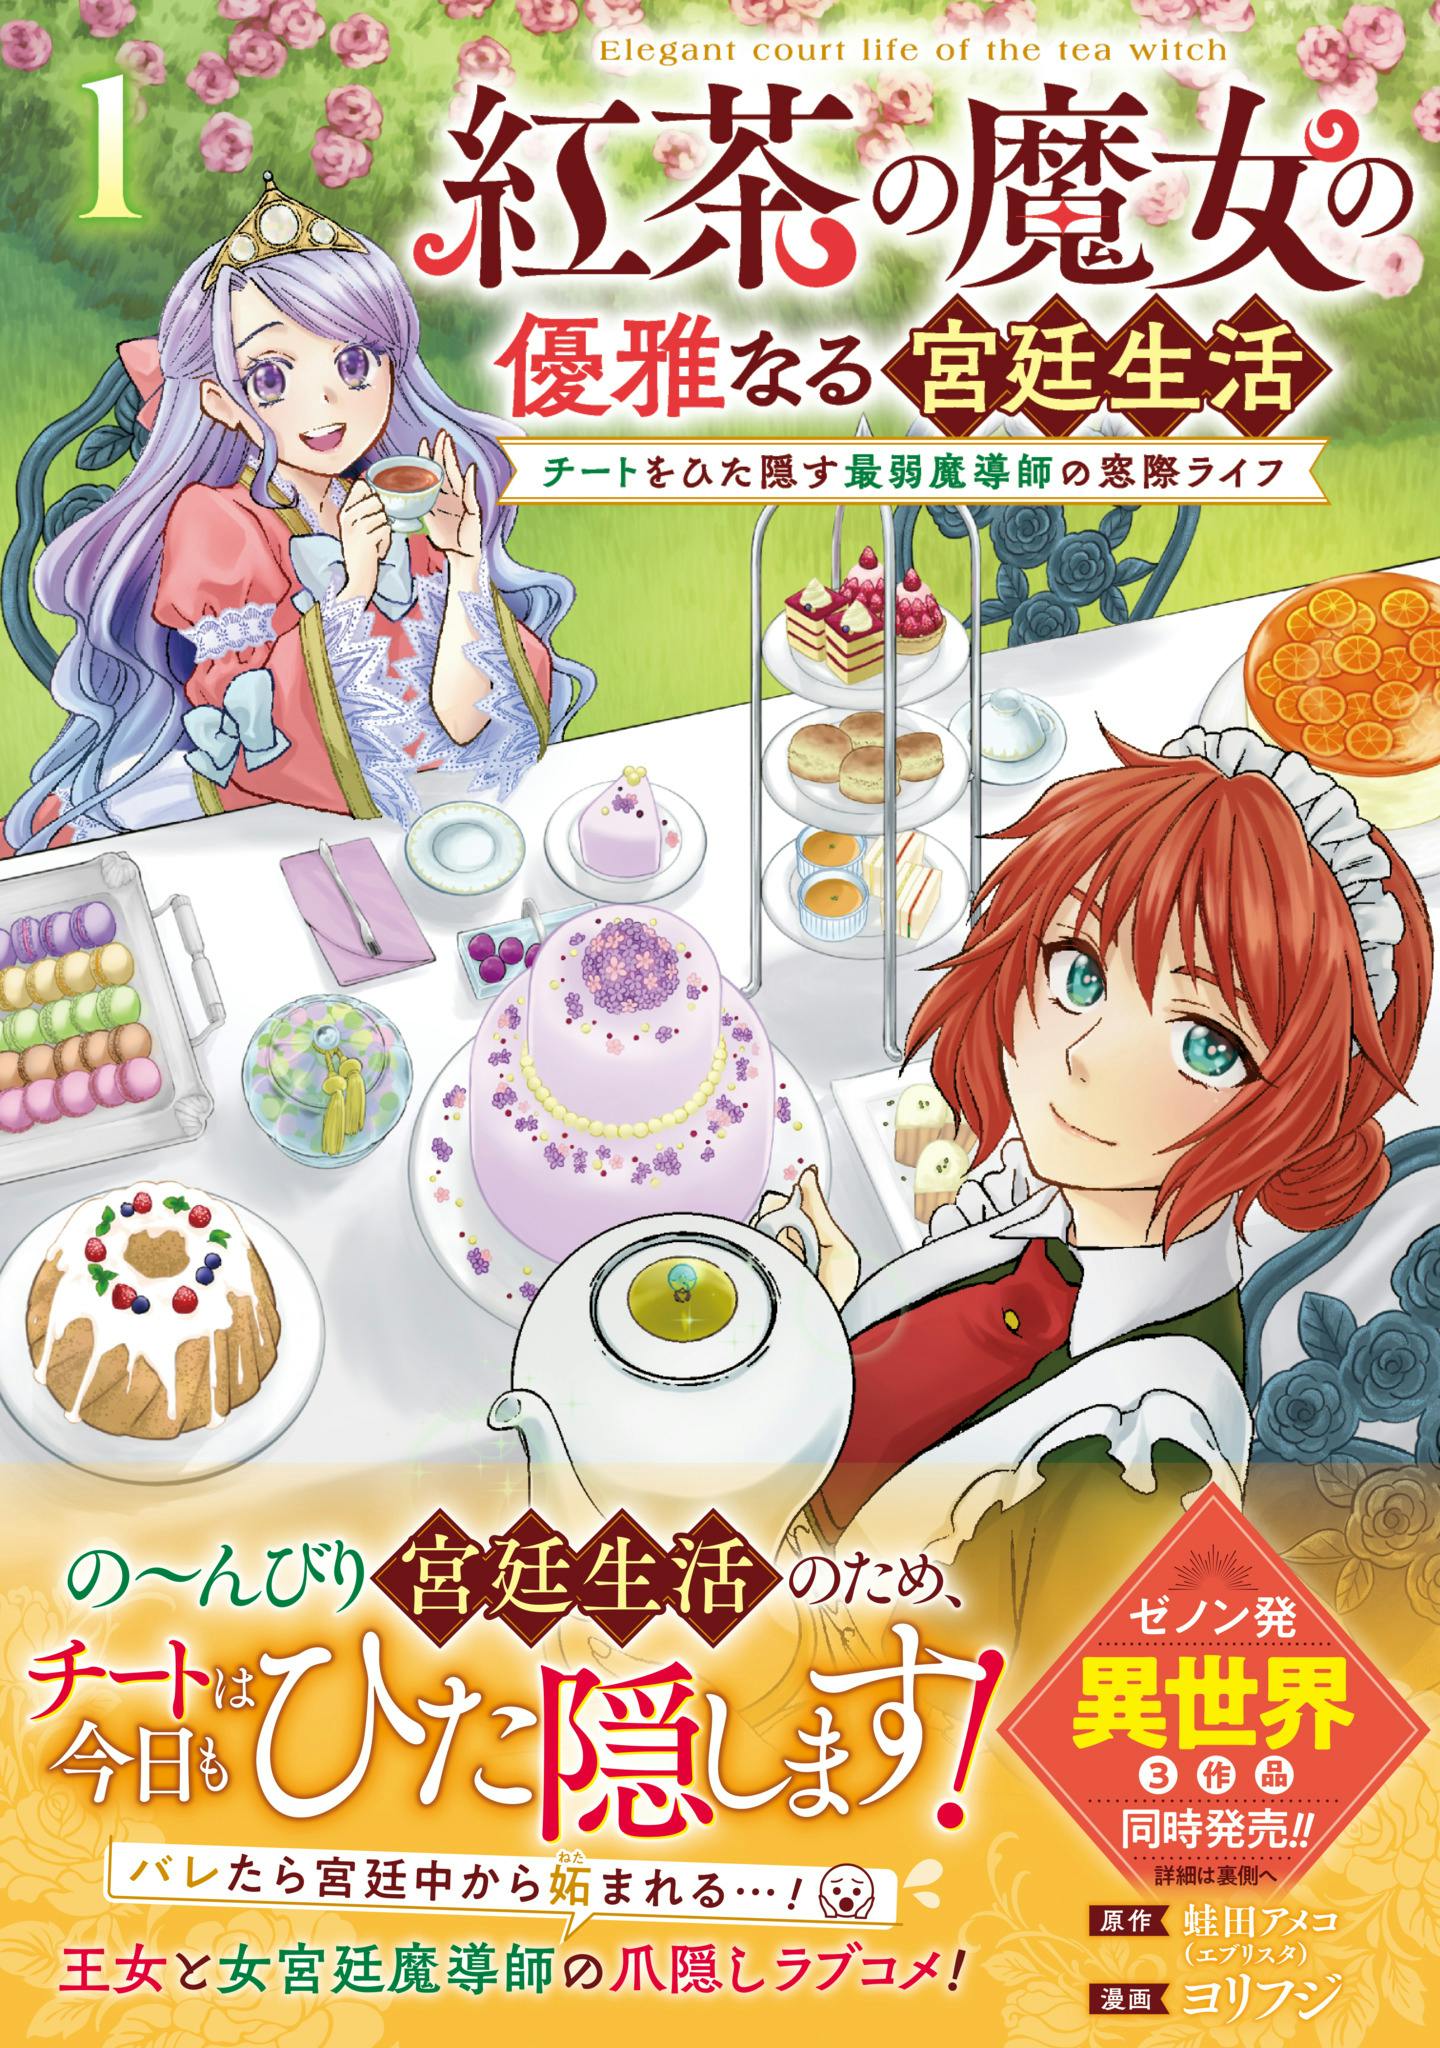 [Preview reading of episode 1] Volume 1 of "The Tea Witch's Elegant Court Life: The Window Life of the Weakest Magician Who Hides Cheat" is now available!